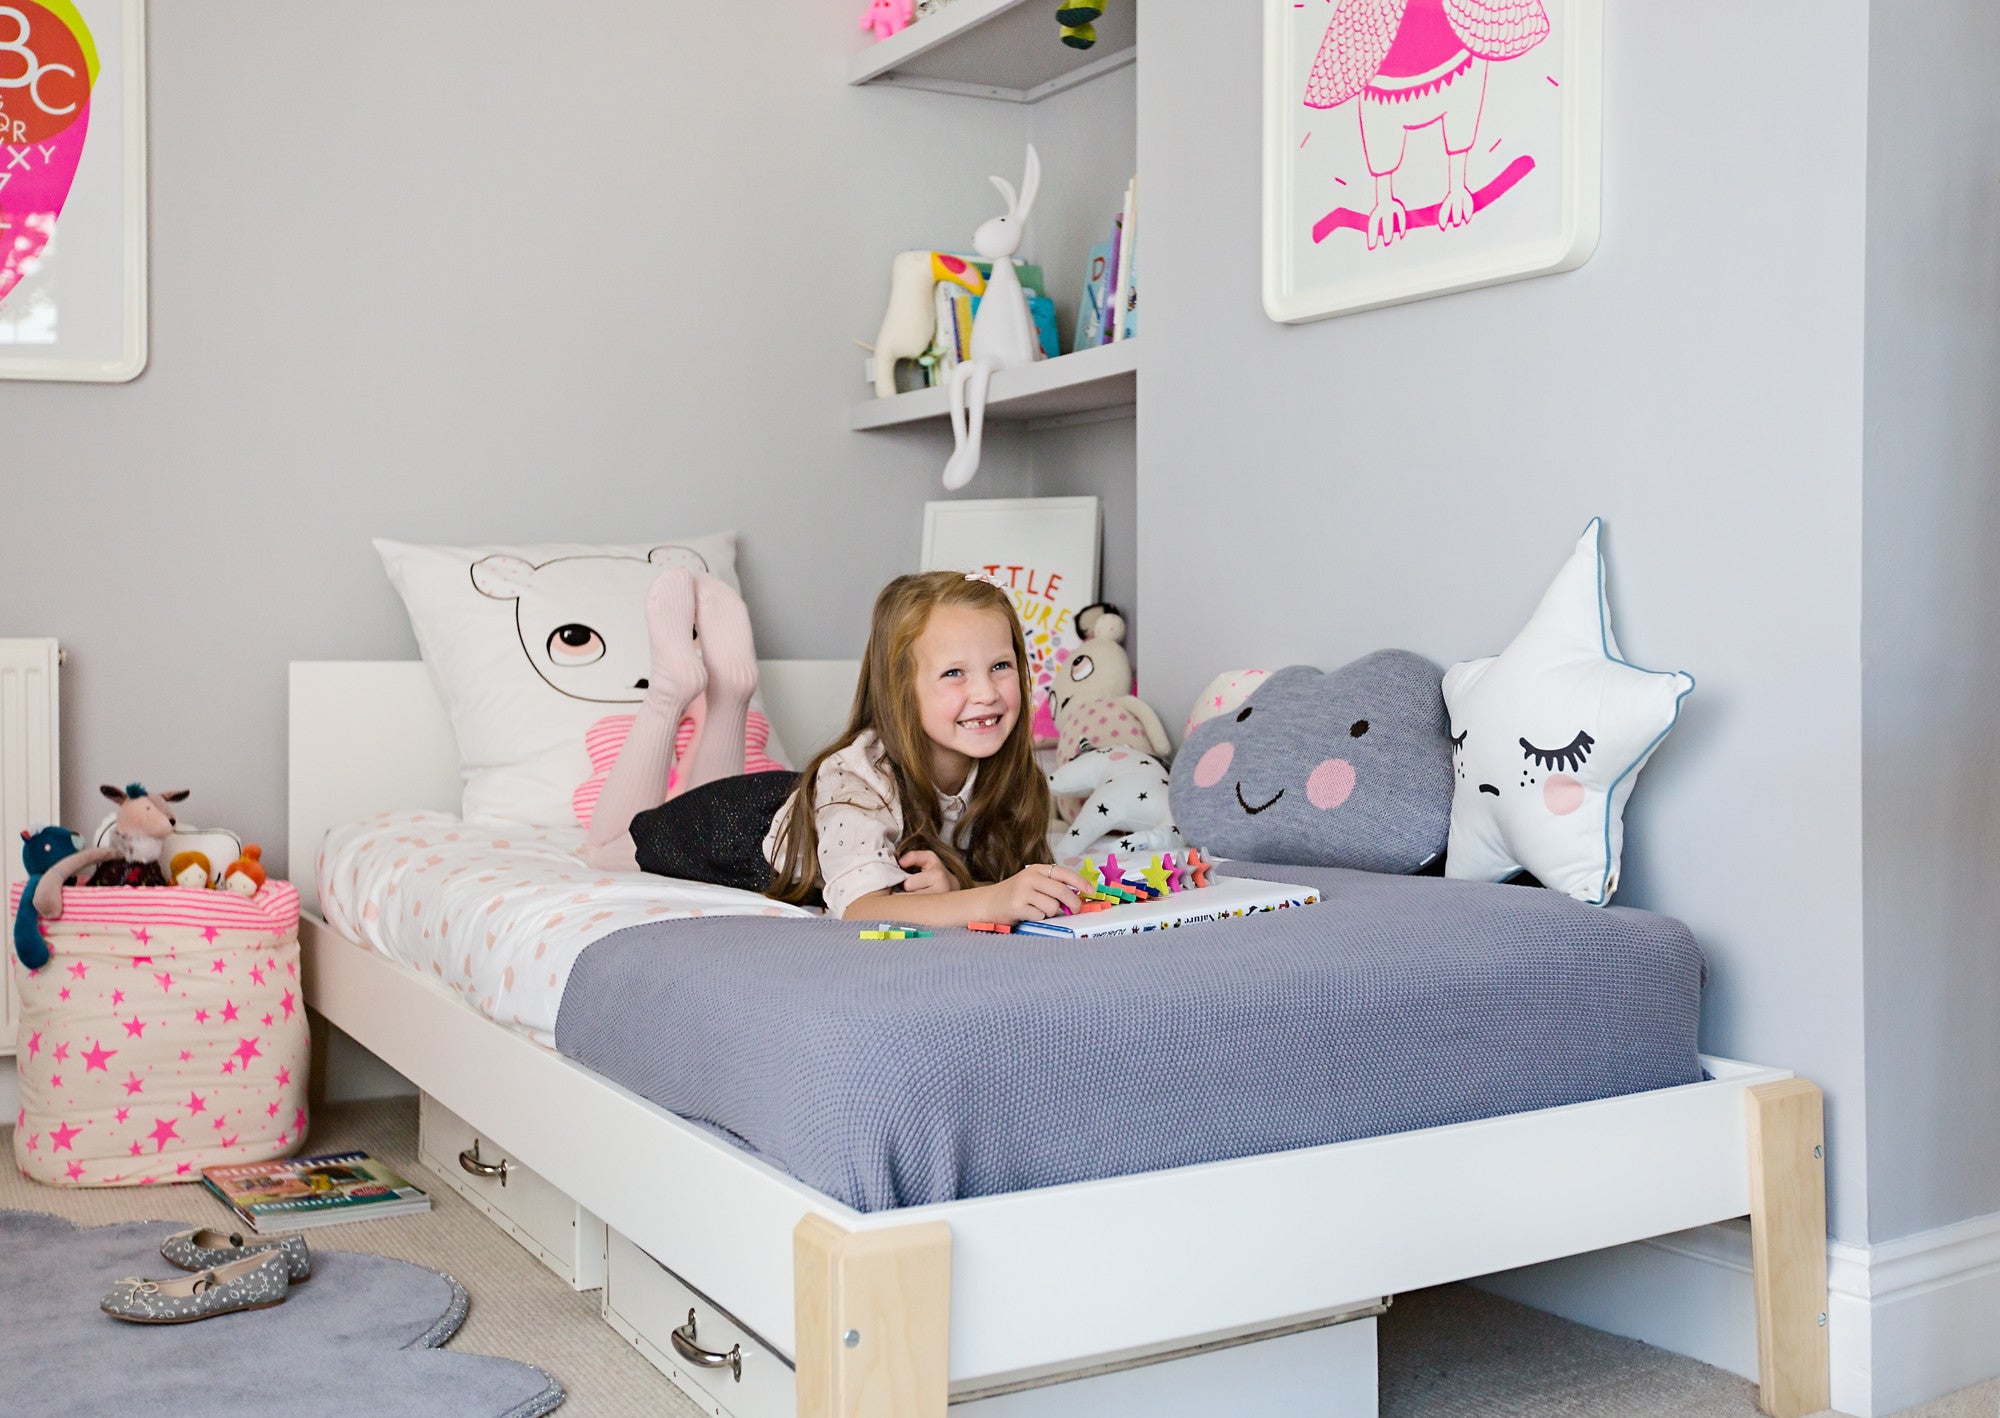 Grey and white, neon and bright children's room by Bobby Rabbit.